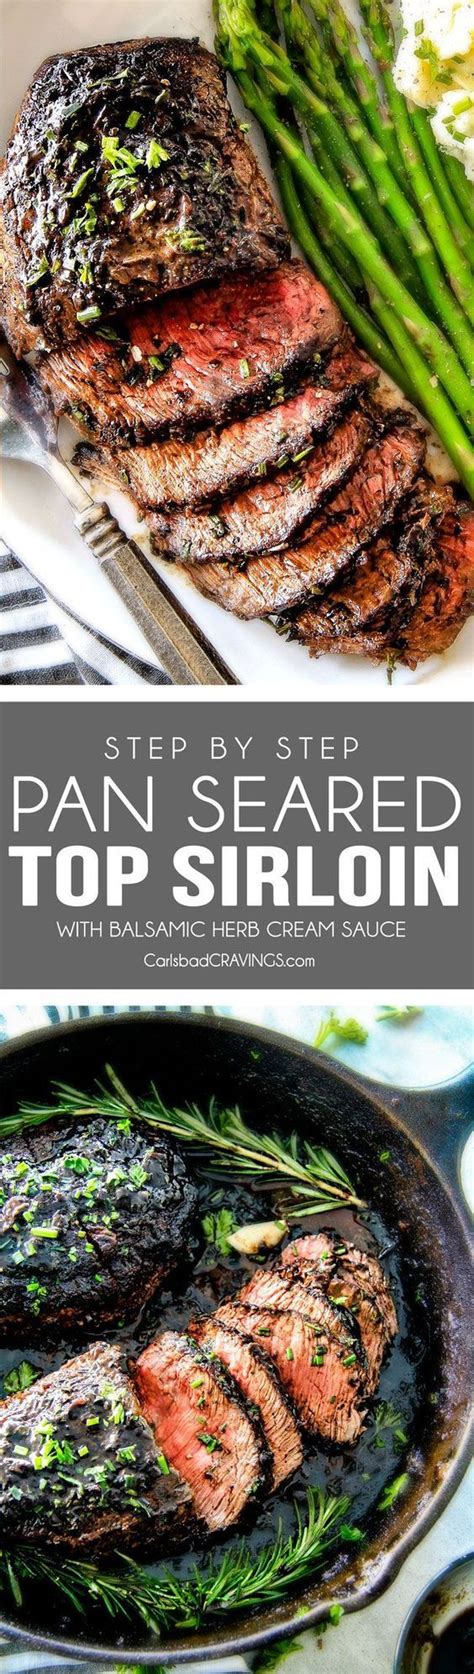 You can also prepare the herb butter a. Easy Pan Seared Steak with a deeply caramelized seared crust and the most amazing Balsamic Herb ...